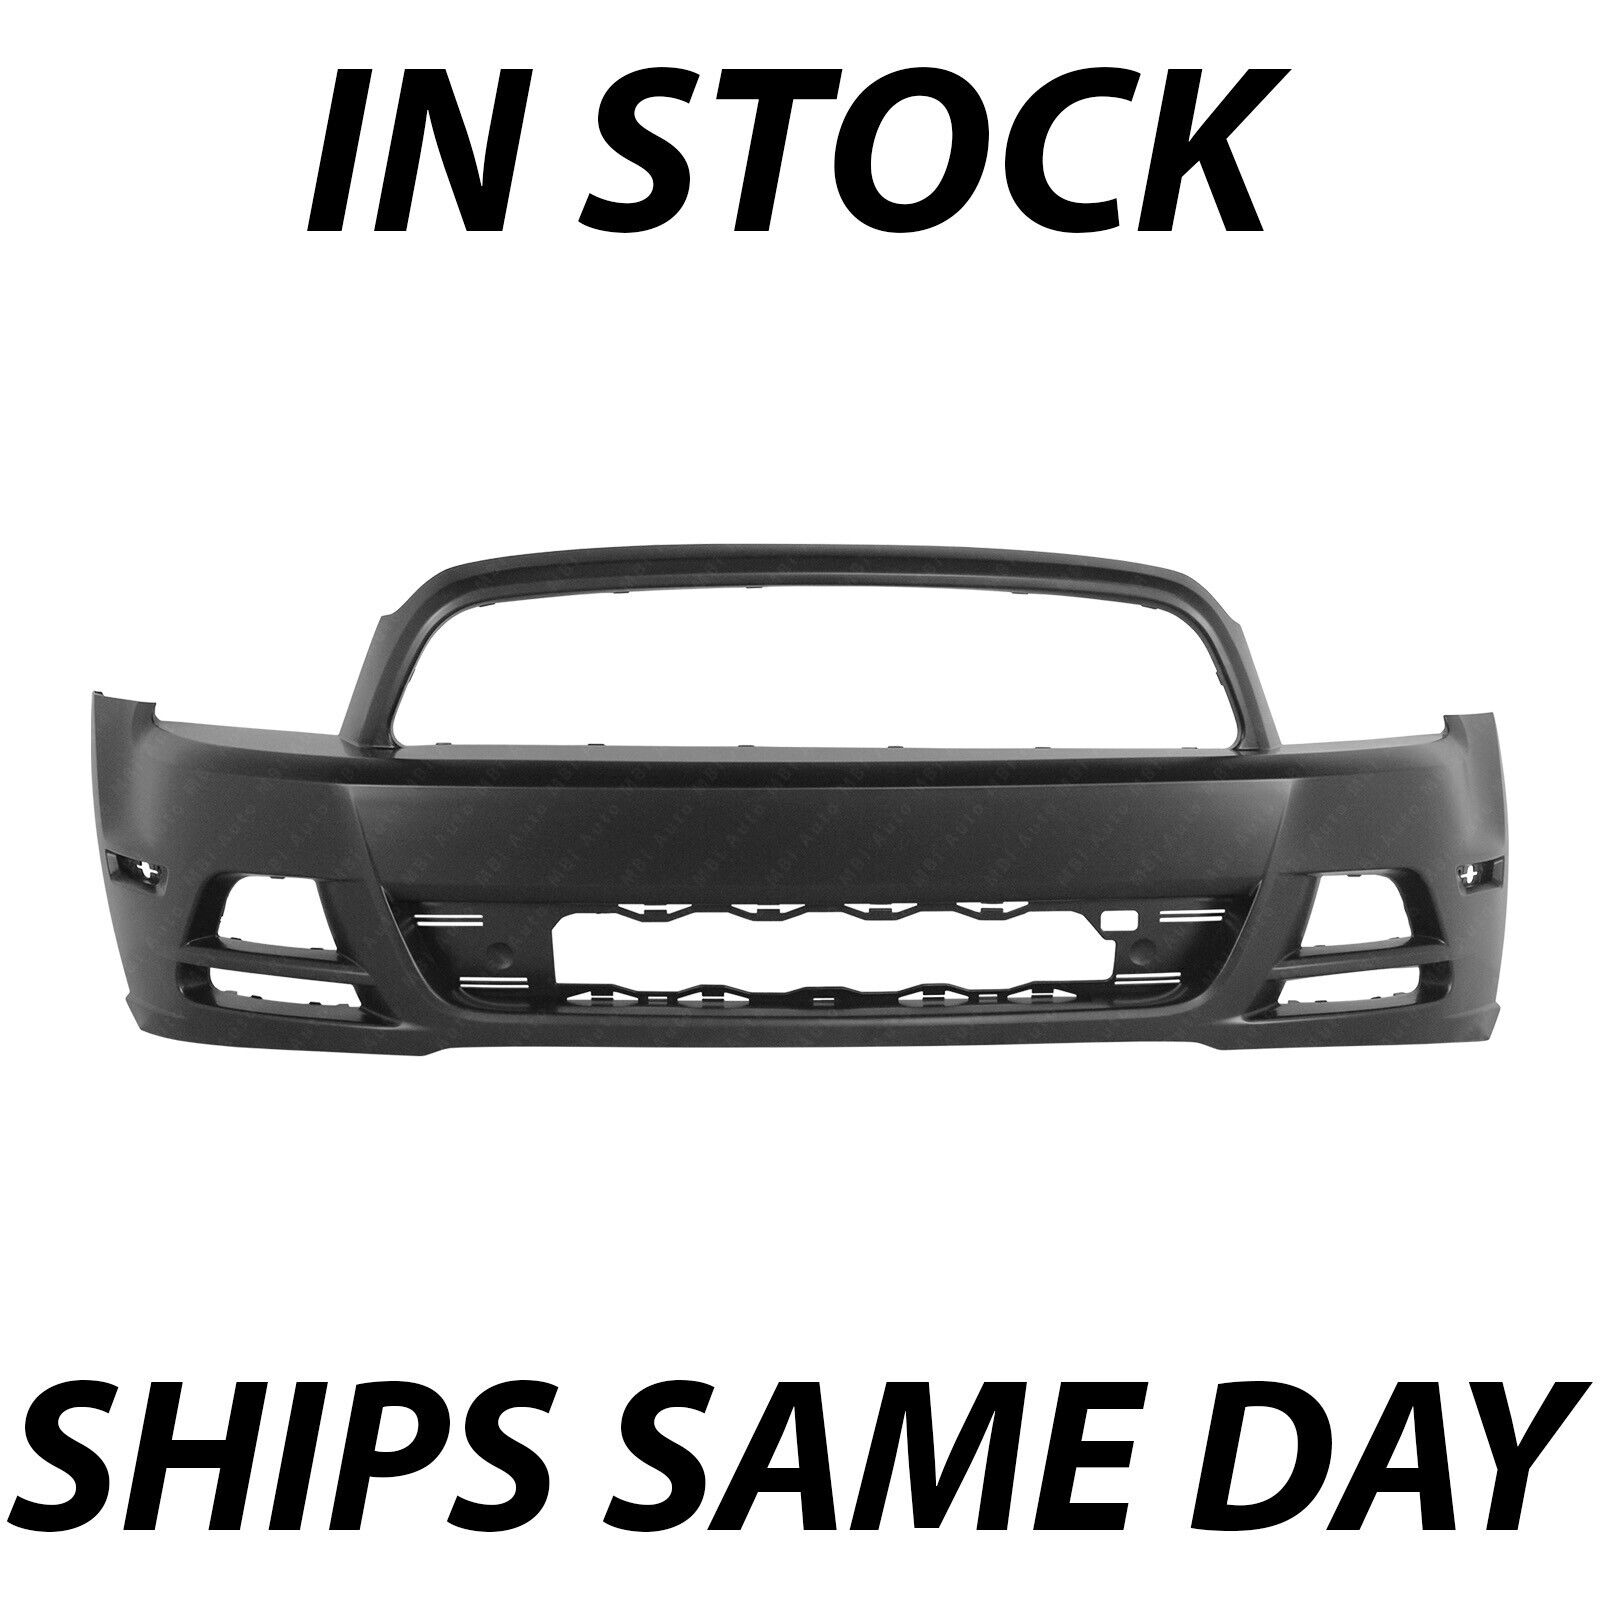 NEW Primered Front Bumper Cover Replacement for 2013 2014 Ford Mustang 13 14